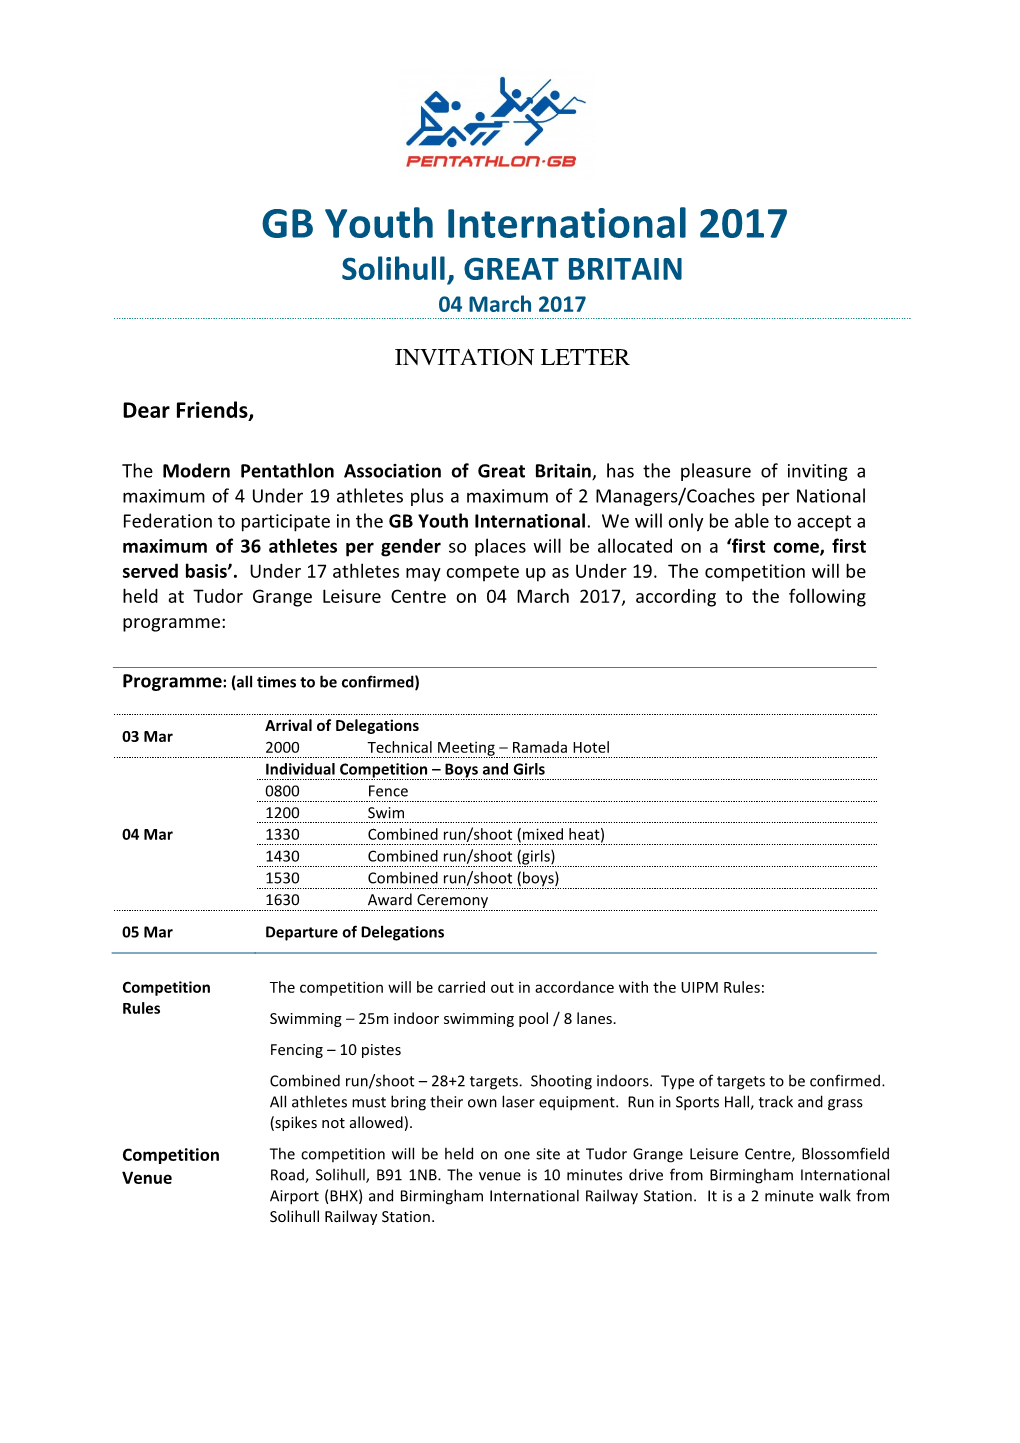 GB Youth International 2017 Solihull, GREAT BRITAIN 04 March 2017